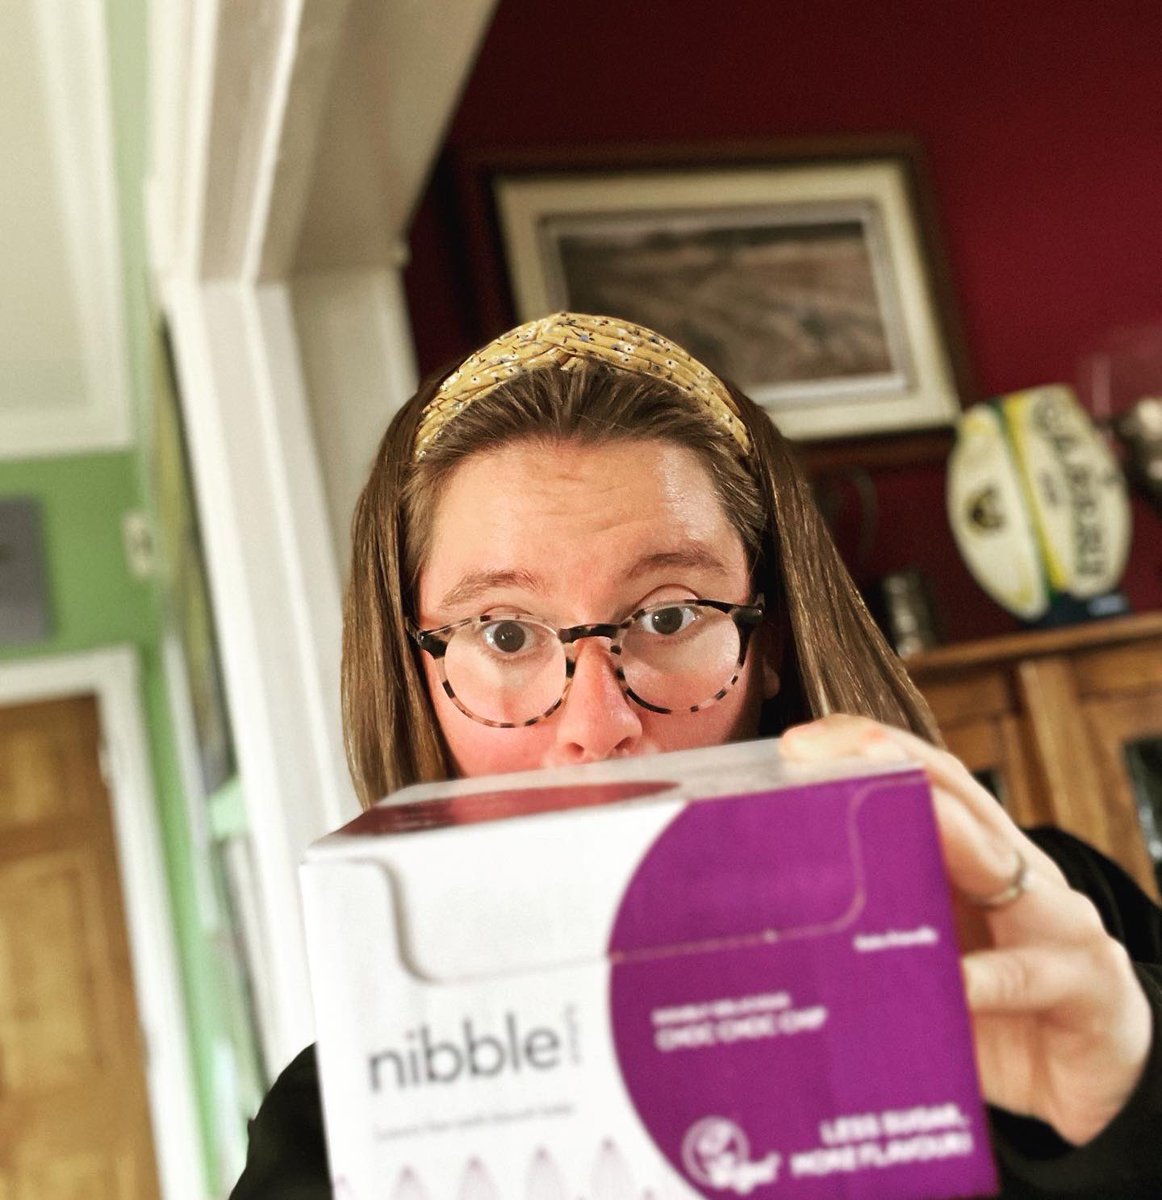 🎉 We are preparing some goody bags for our teachers to celebrate the end of term! 🎉 There’s some @nibblesimply on its way teachers! 😋 Enjoy and nibble away. If you would like some award winning protein bites yourself, use the code minty15 on nibblesimply.com